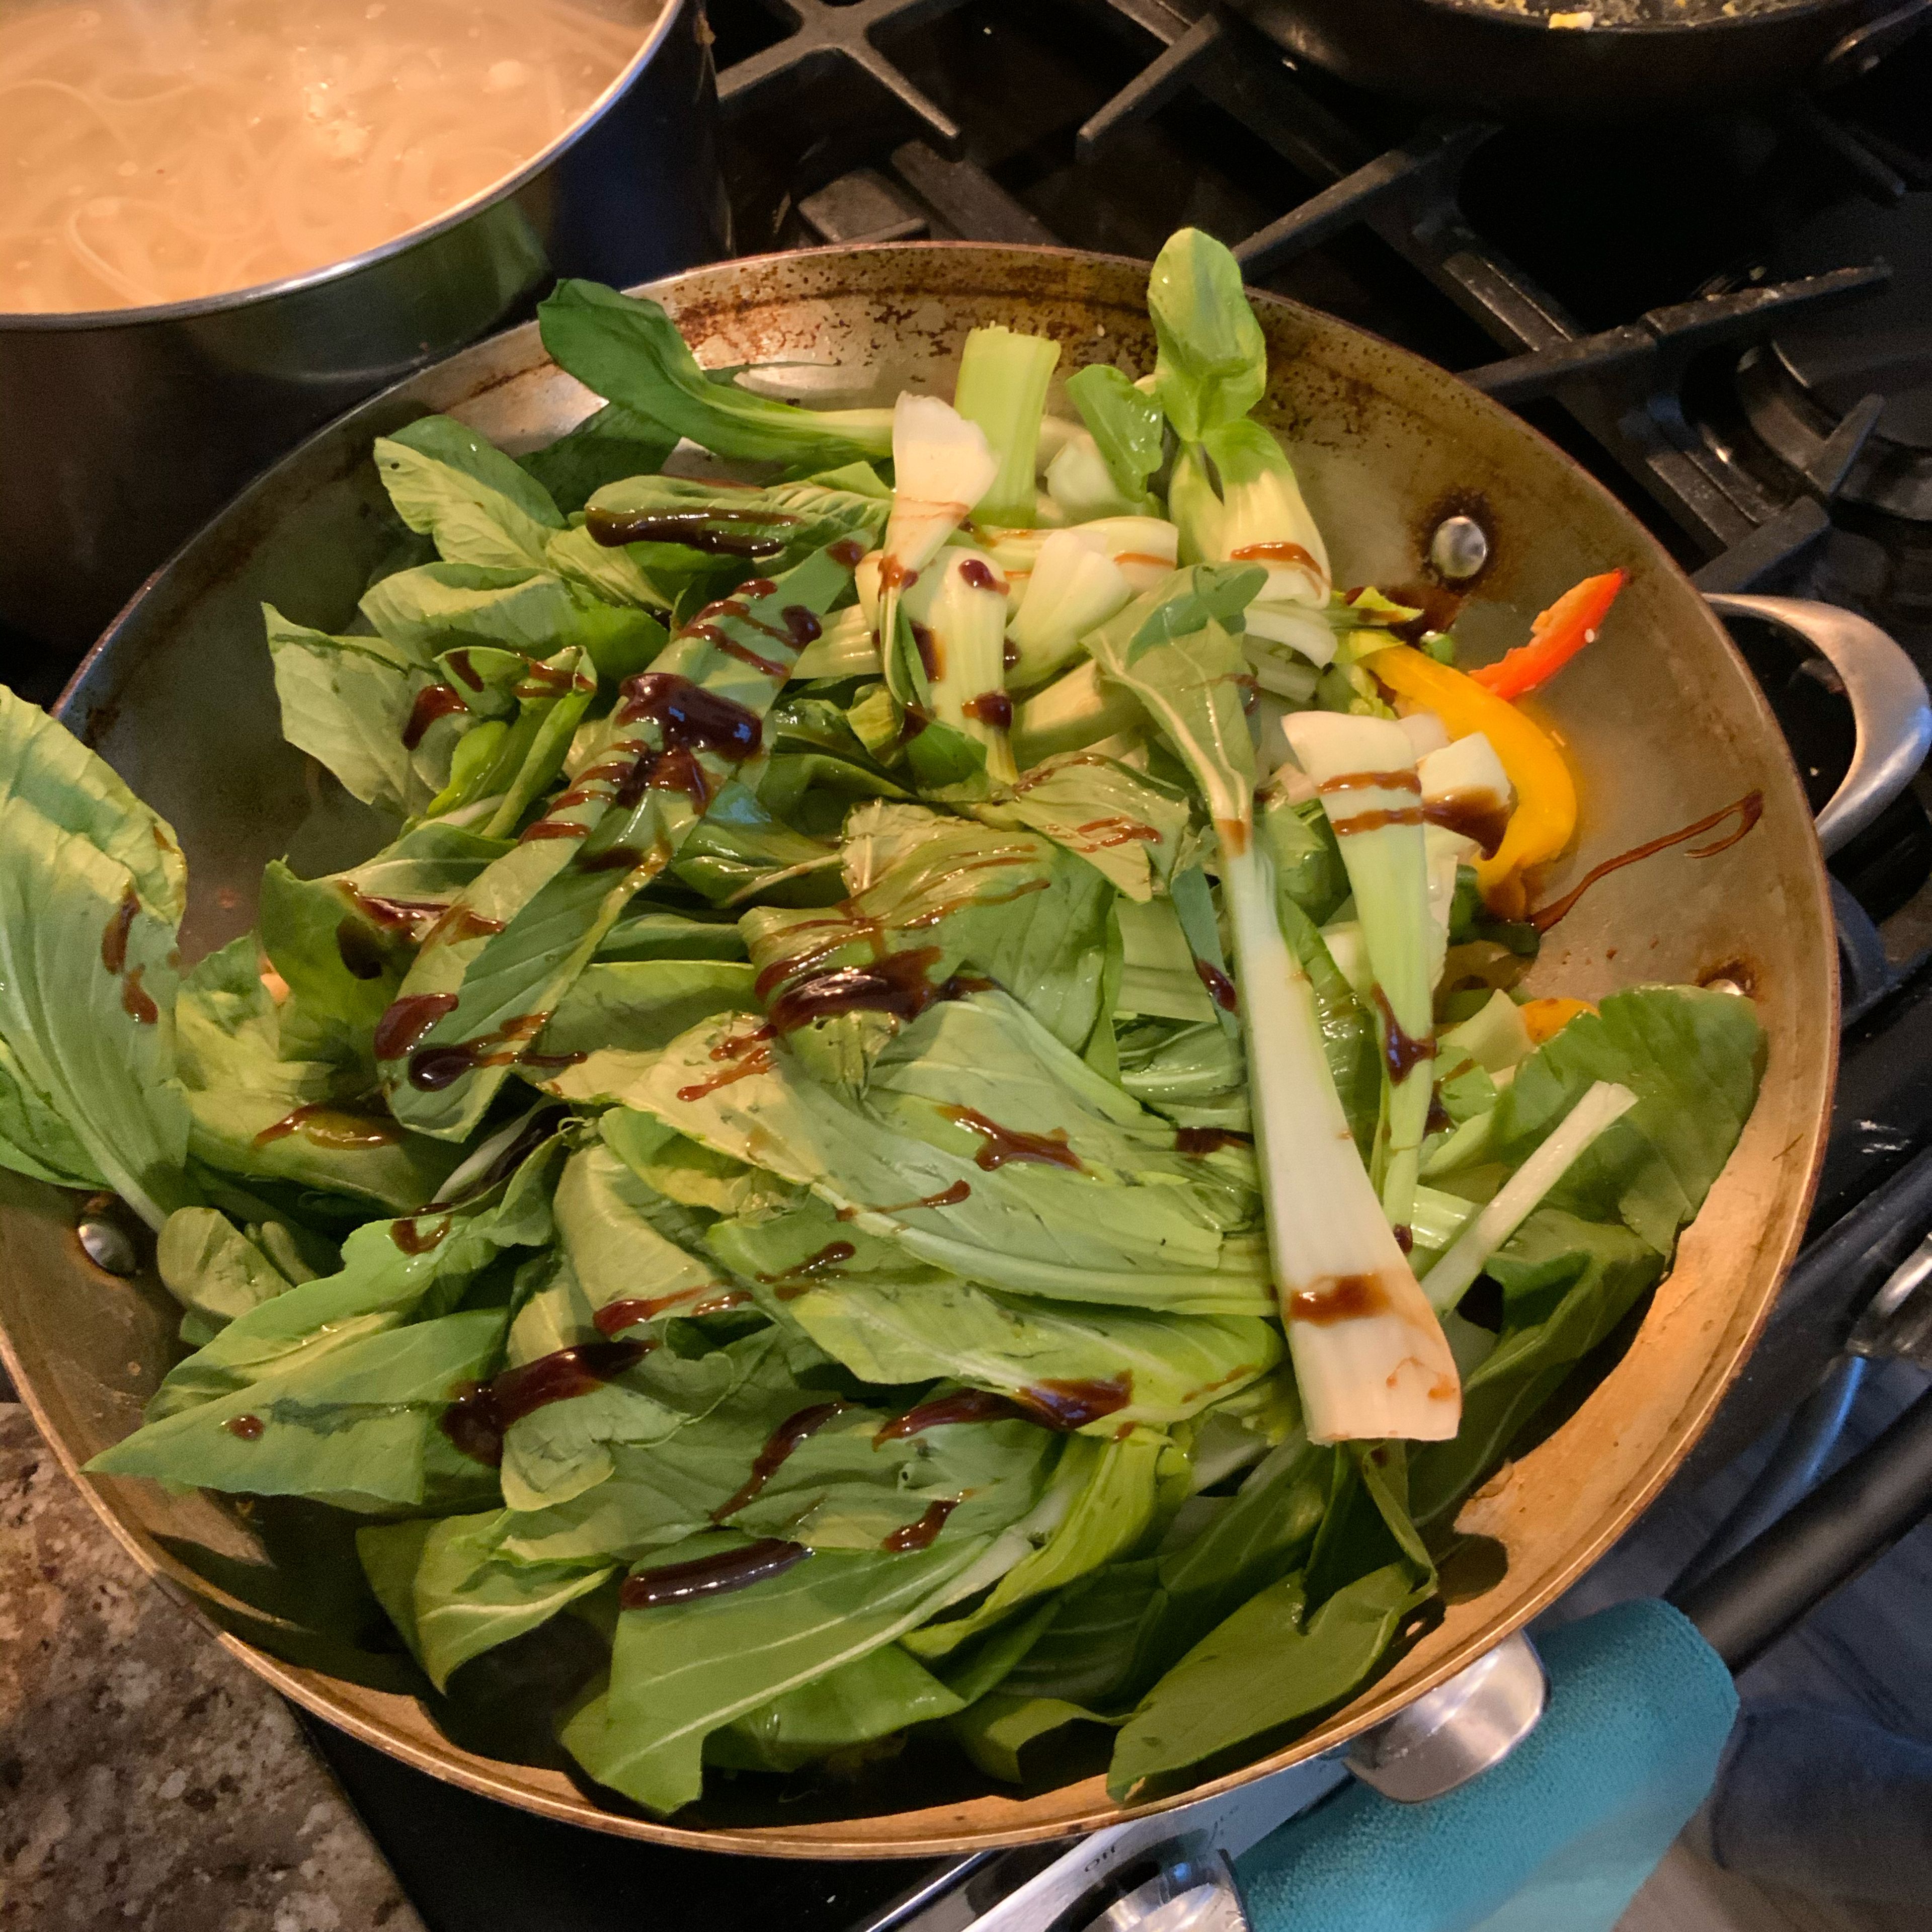 Put remaining vegetable and seasoning into the wok for approximately four minutes.